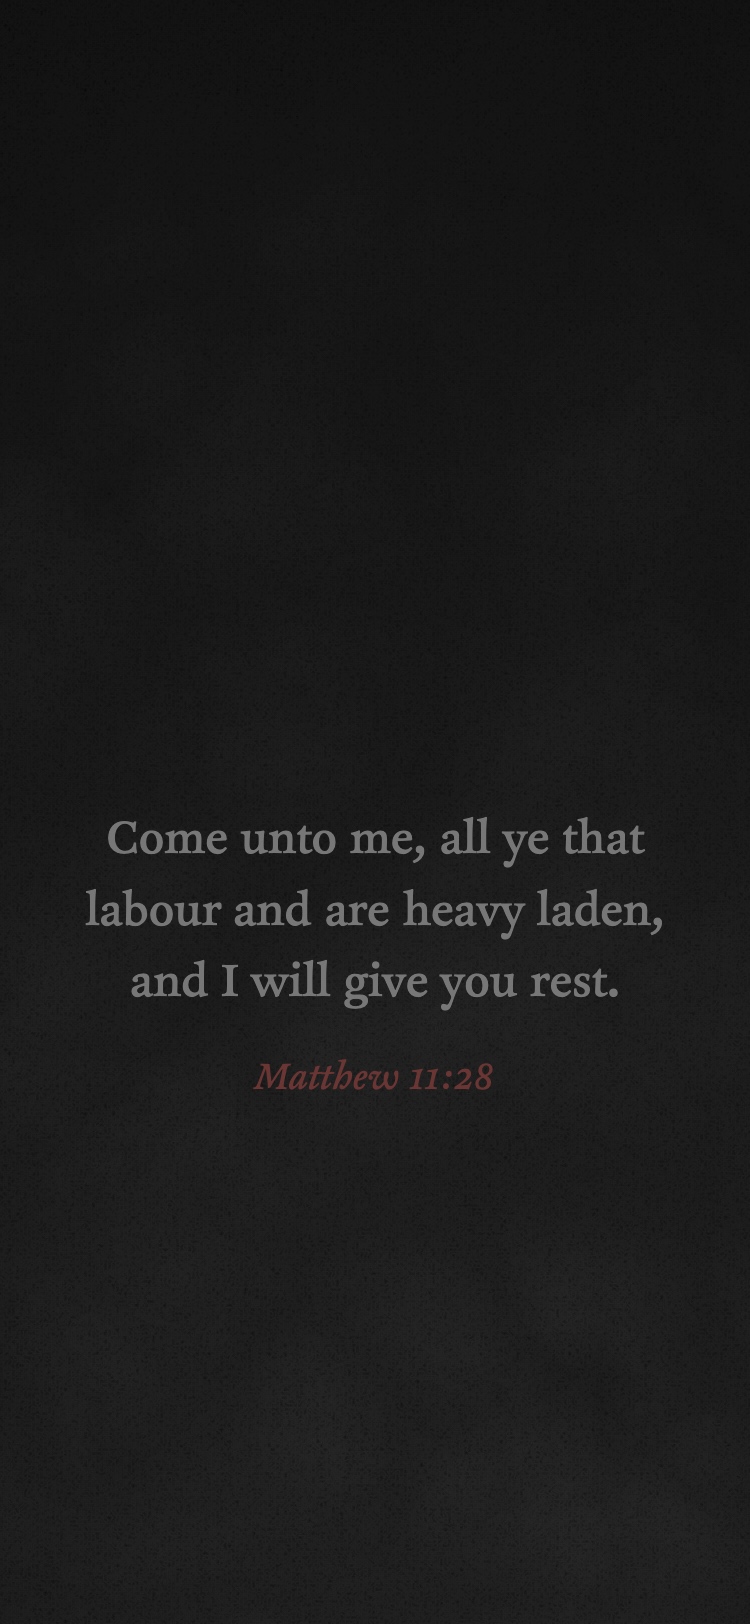 Dark cloudy background with the text of Matthew 11:28 at the center.